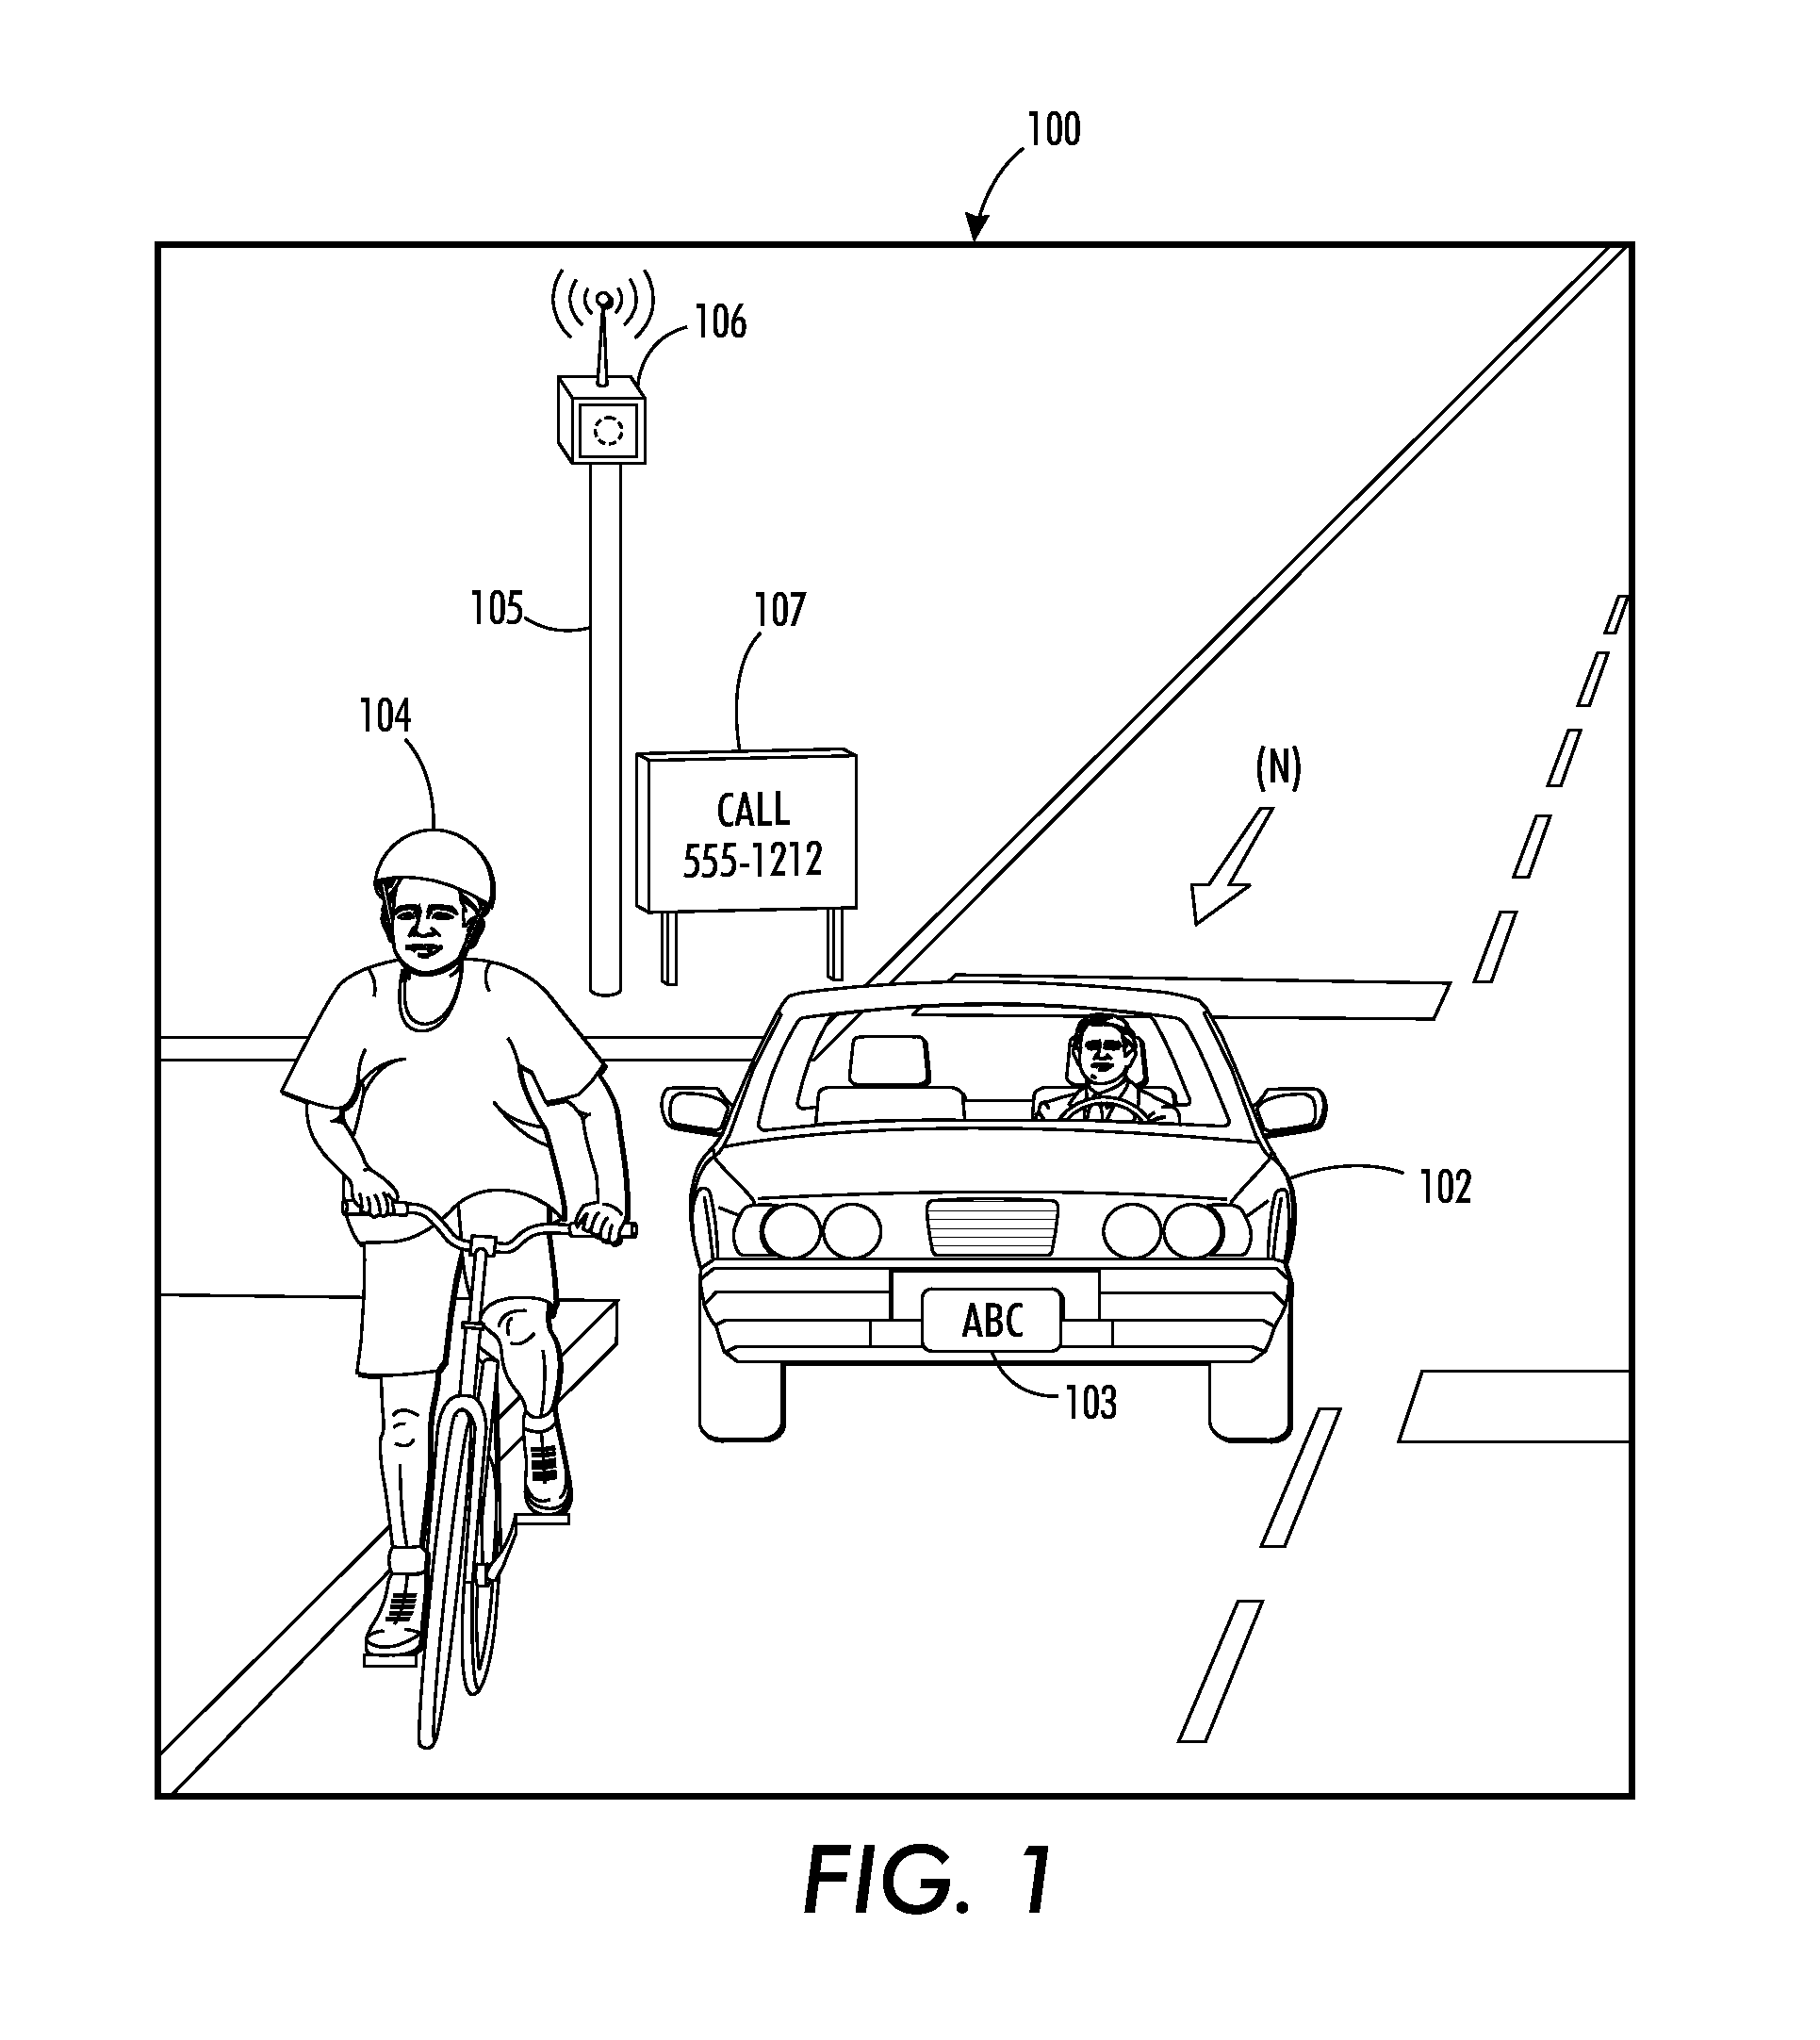 Obscuring identification information in an image of a vehicle